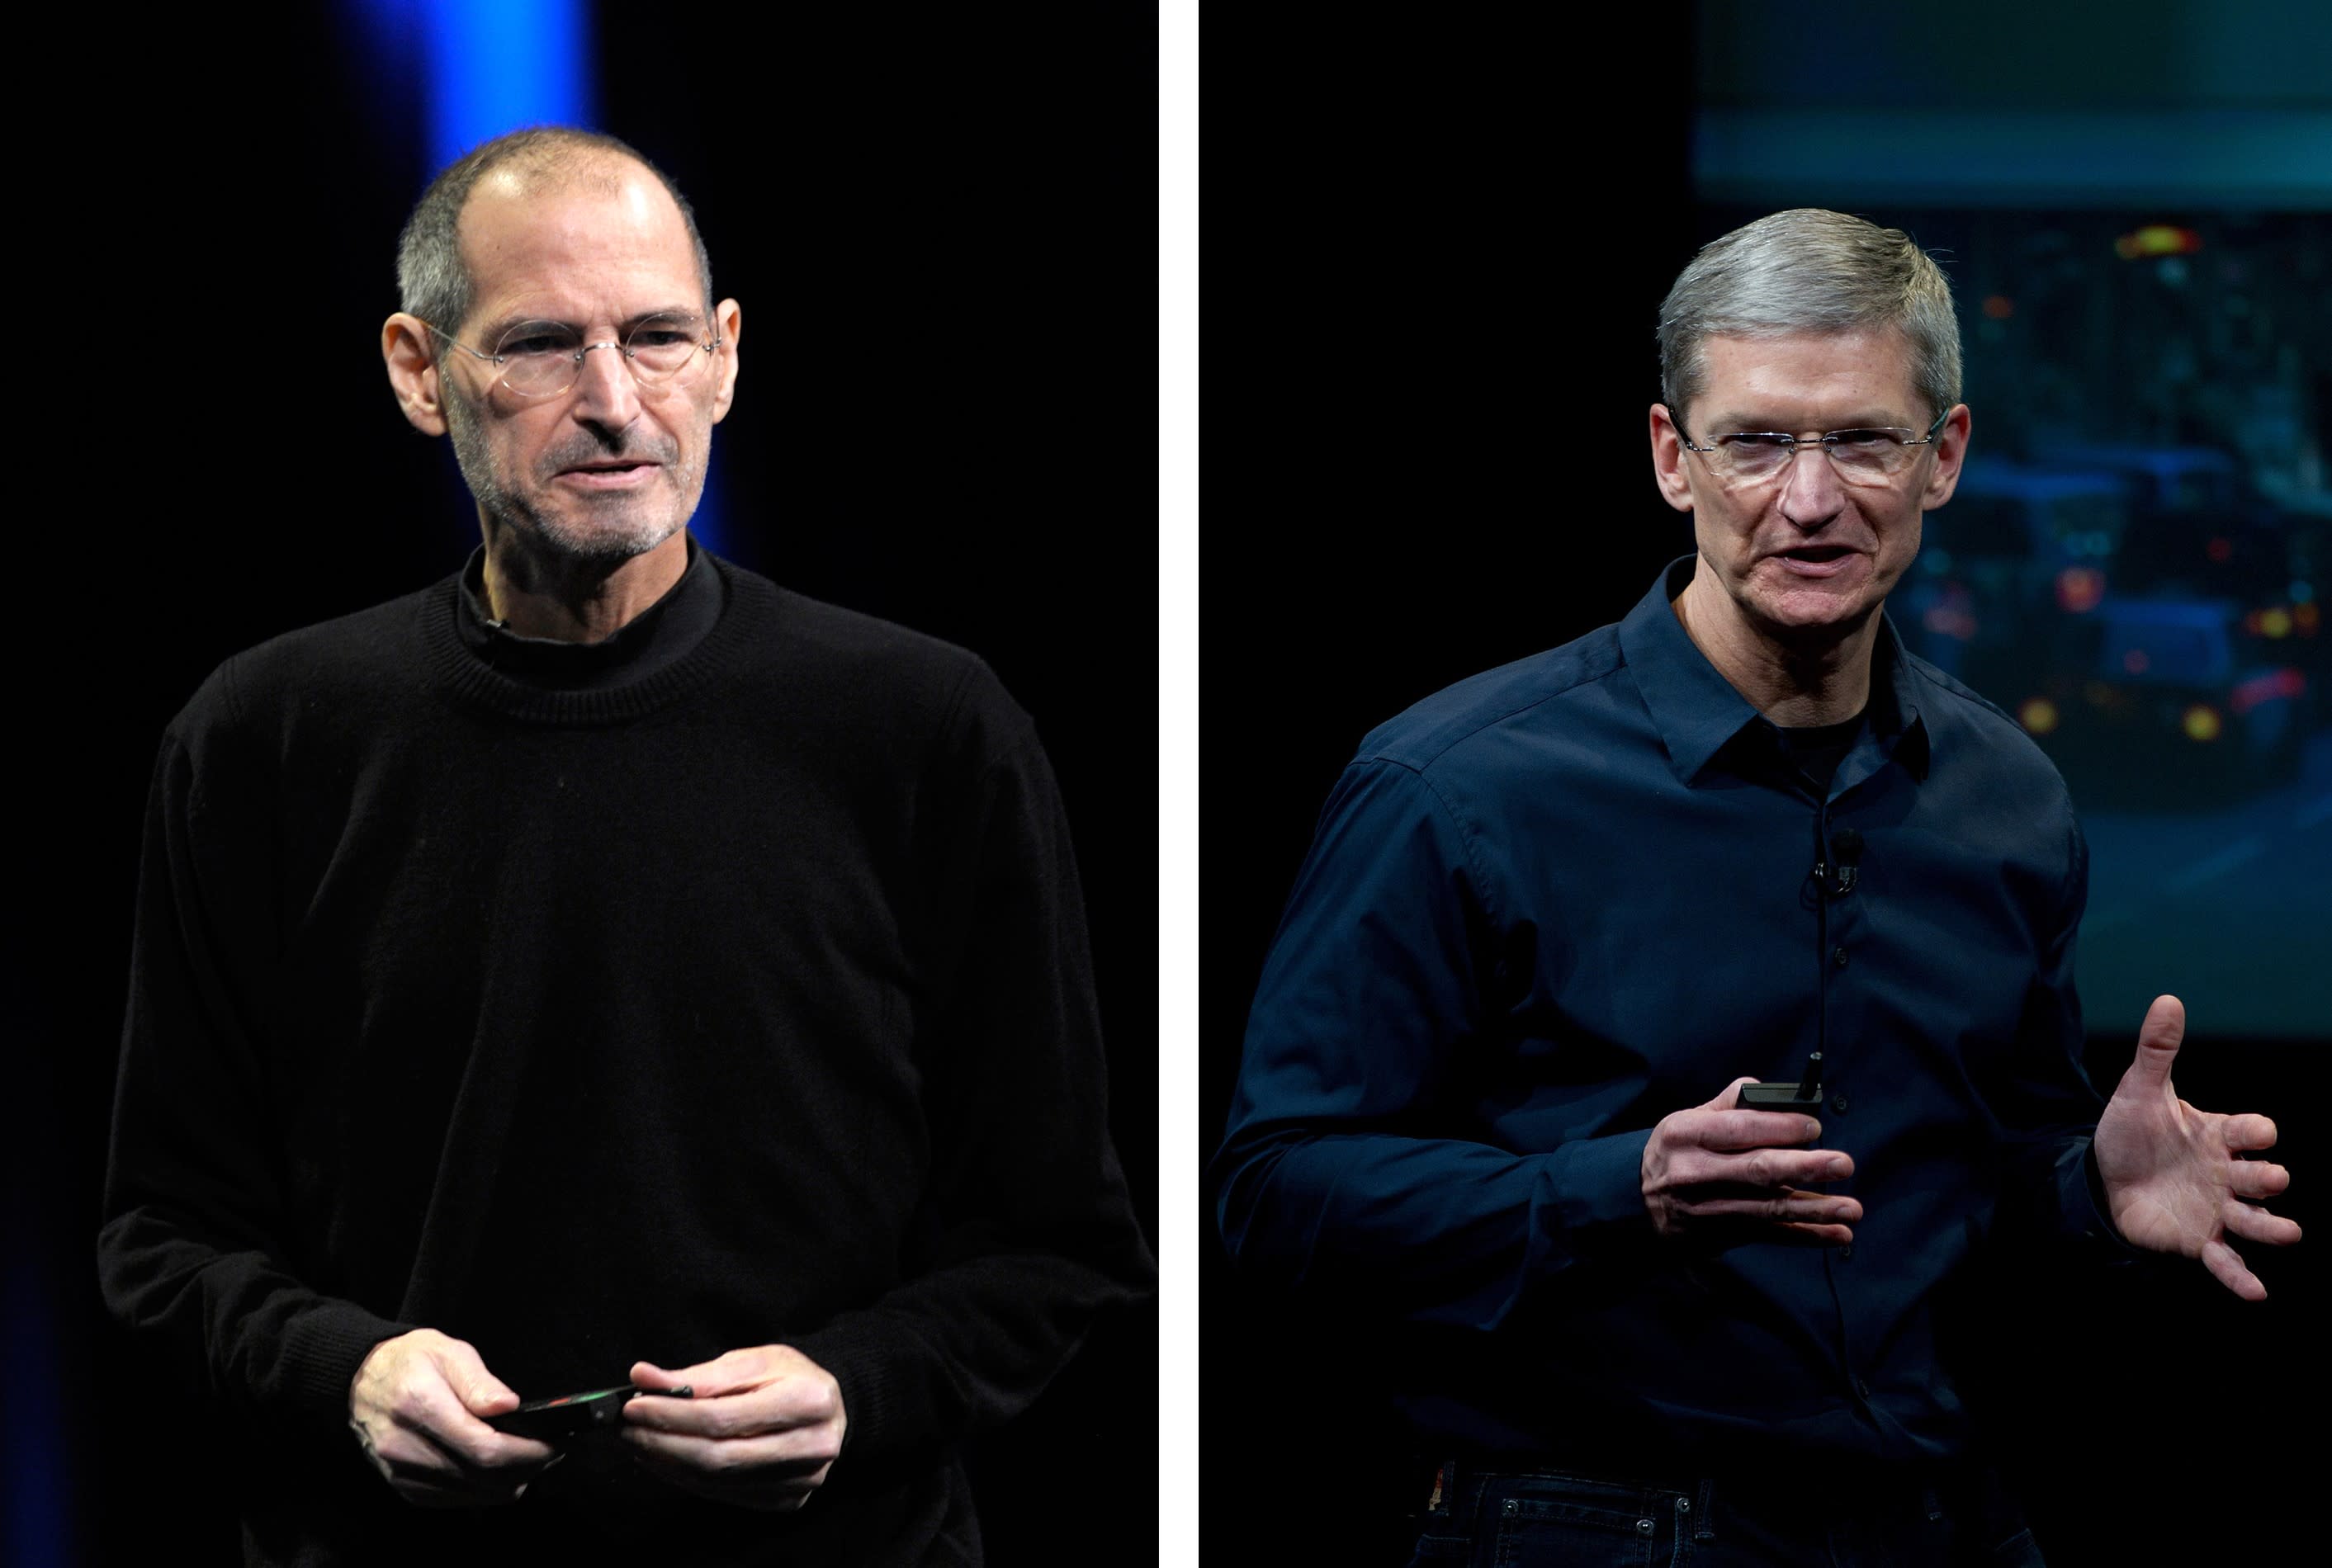 Steve Jobs was legendary, and Tim Cook is a 'genius,' says author